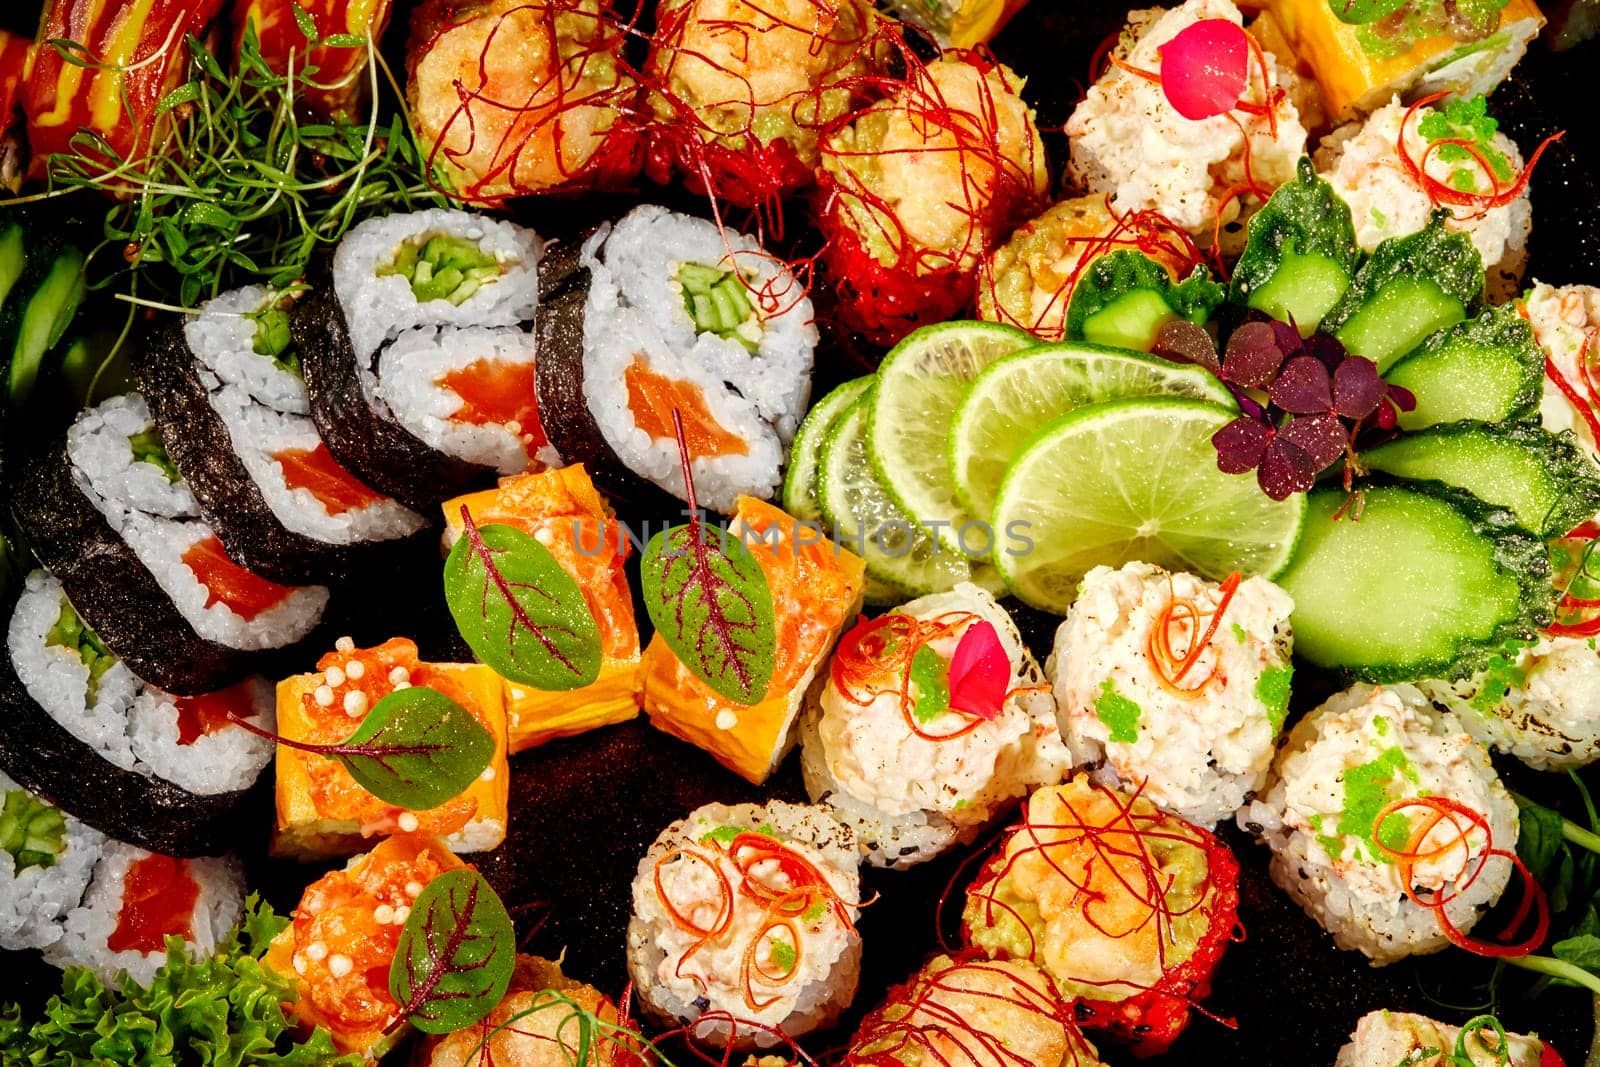 Closeup of richly adorned sushi rolls assortment with various delicate toppings of fish, seafood and vegetables, garnished with greens, slices of lime and sprinkled with sesame seeds on dark backdrop